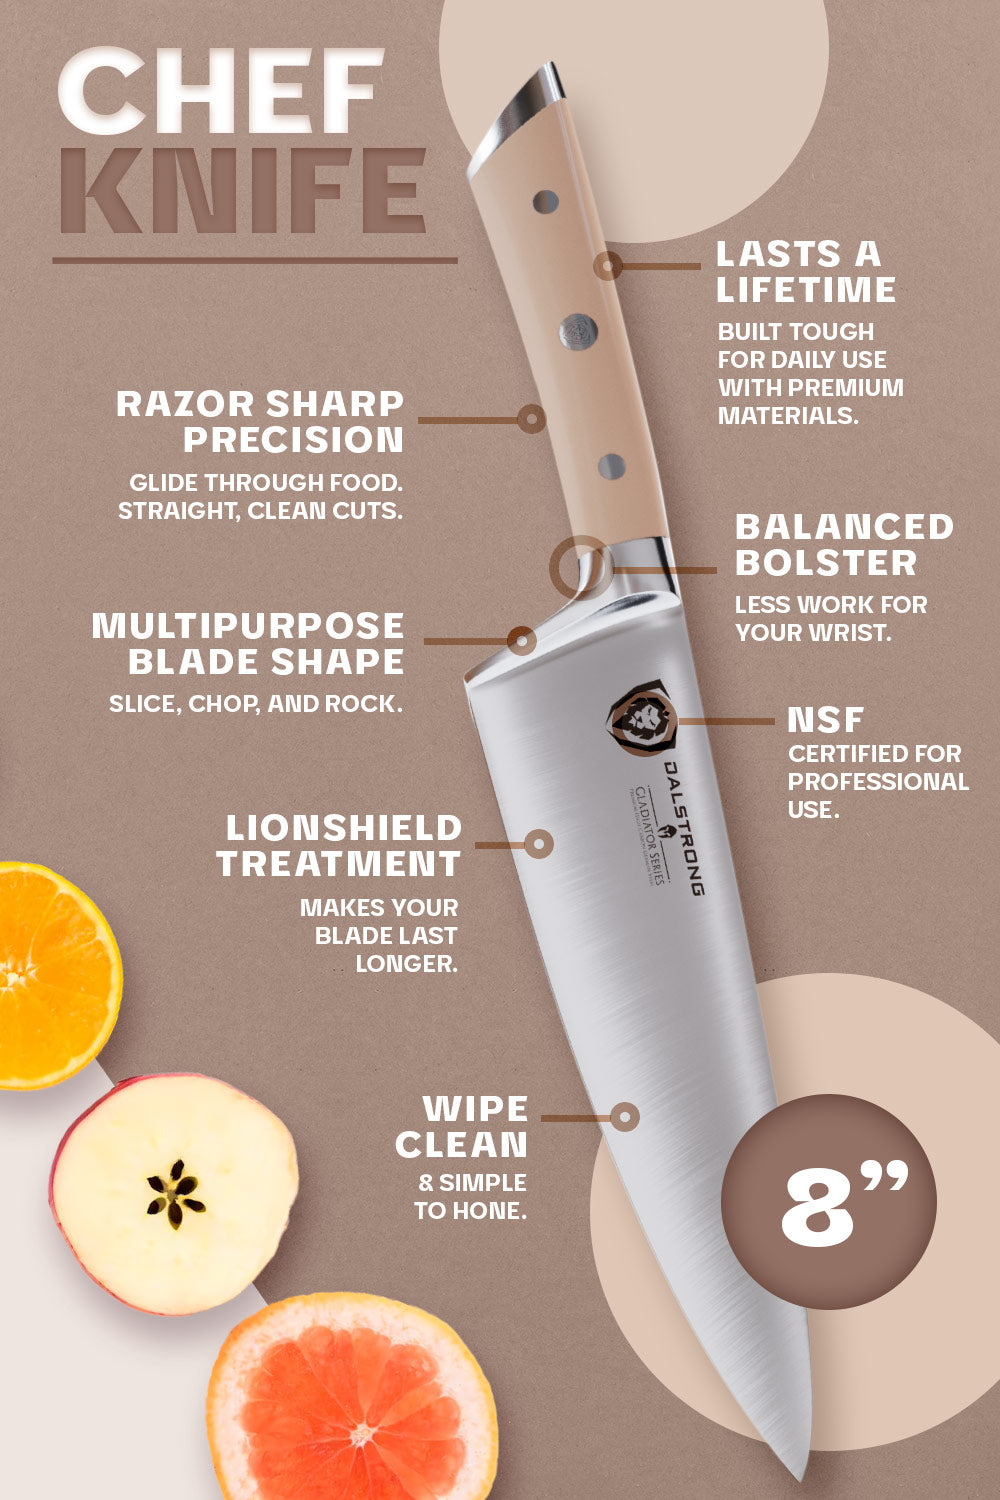 Dalstrong gladiator series 8 inch chef knife with peach handle specification.